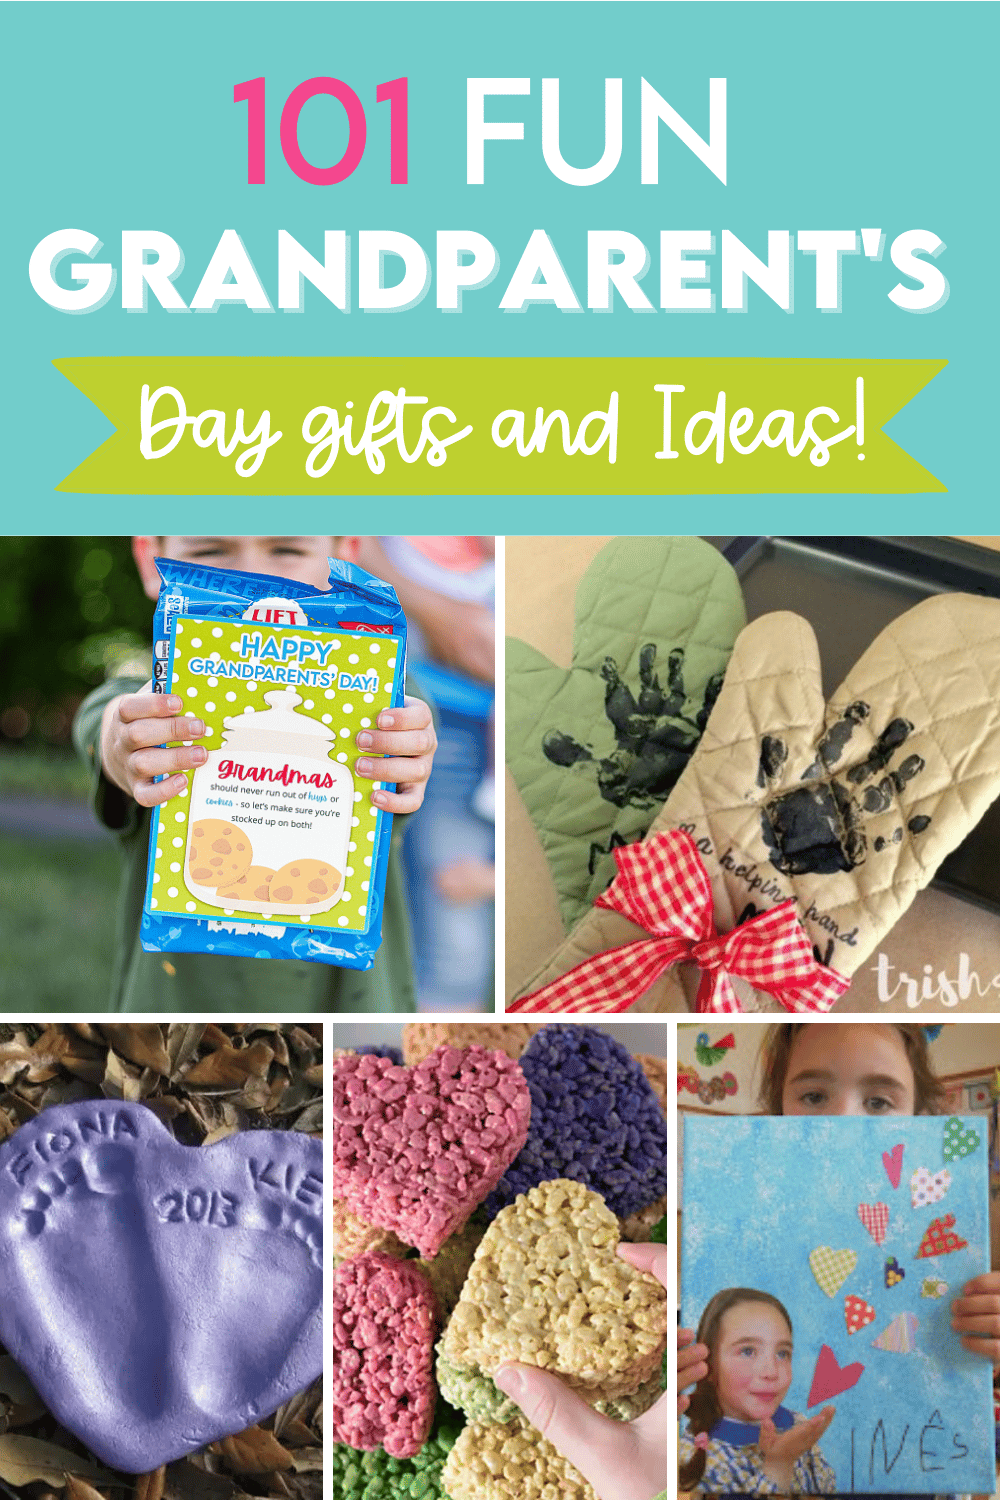 Take Grandparent's Day to the next level with these gift ideas from www.TheDatingDivas.com! | The Dating Divas